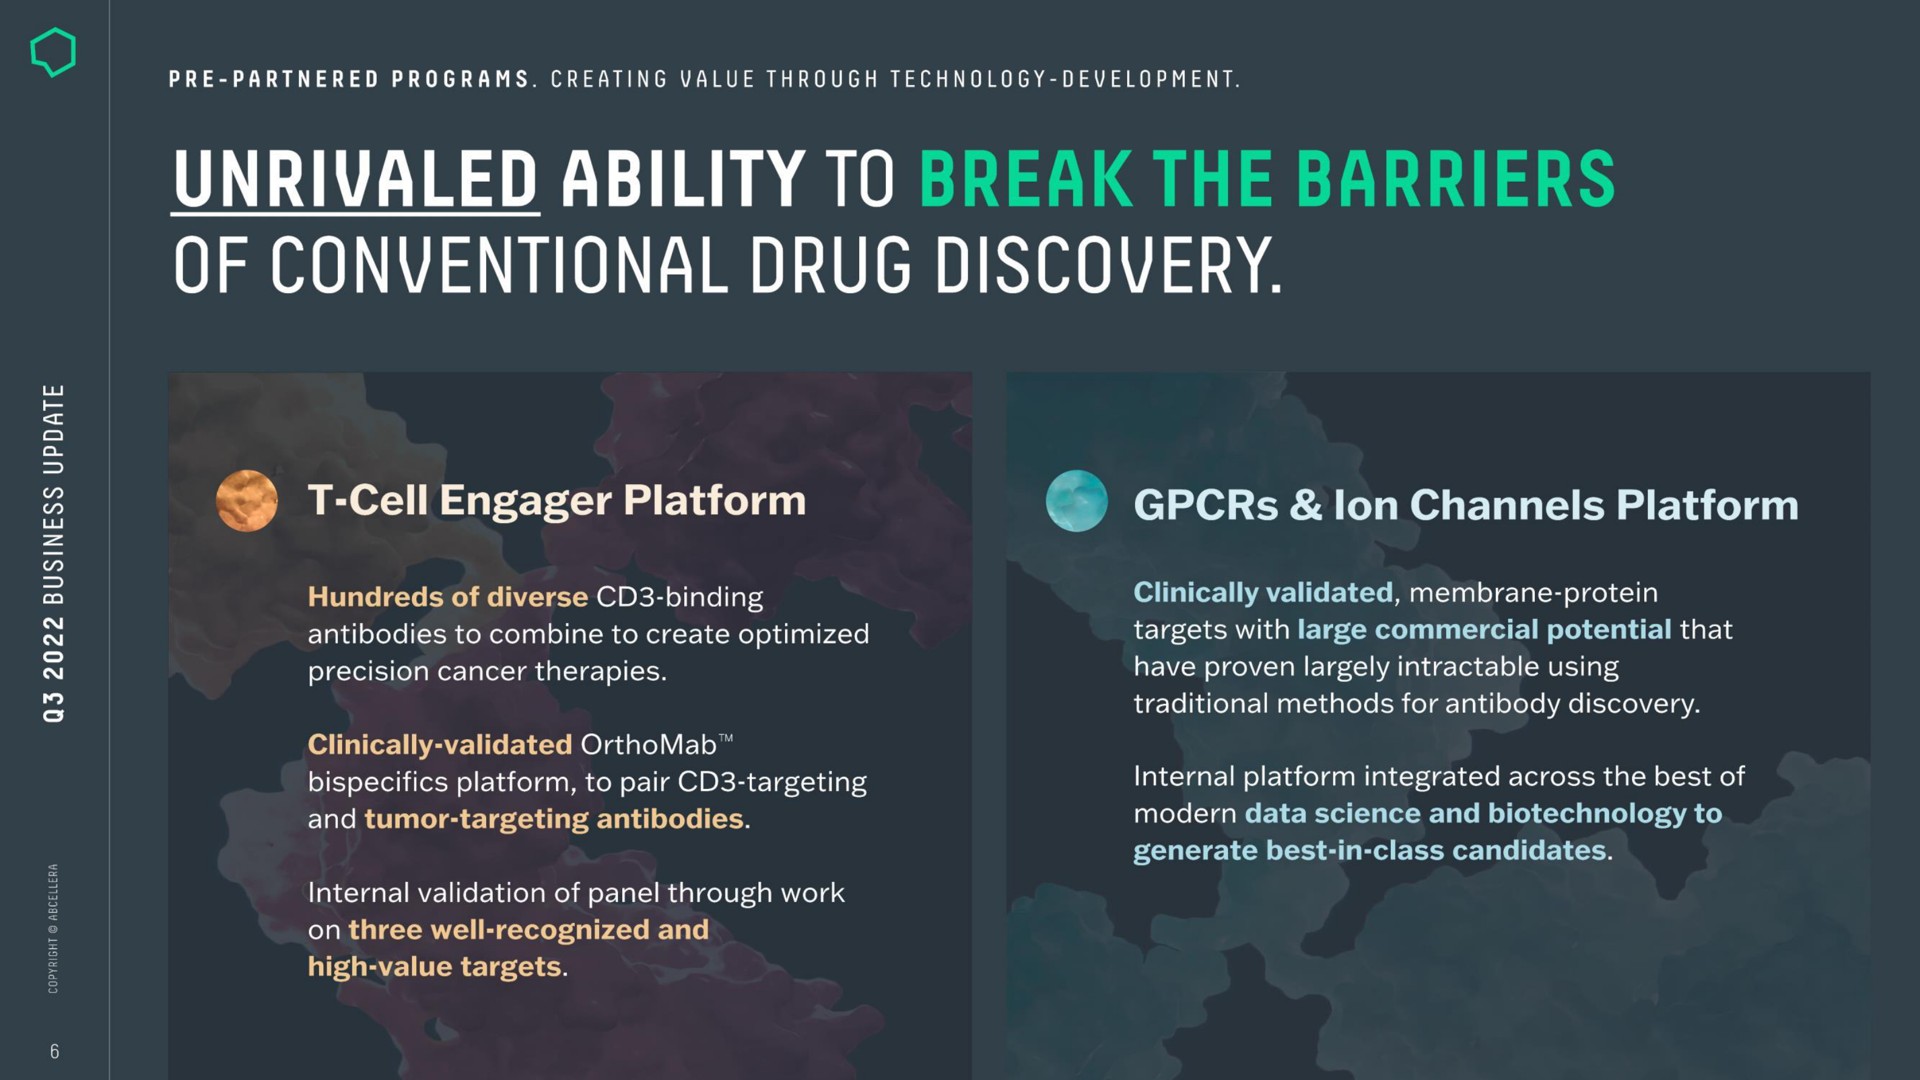 i a a uts of conventional drug discovery cell engager platform channels platform | AbCellera